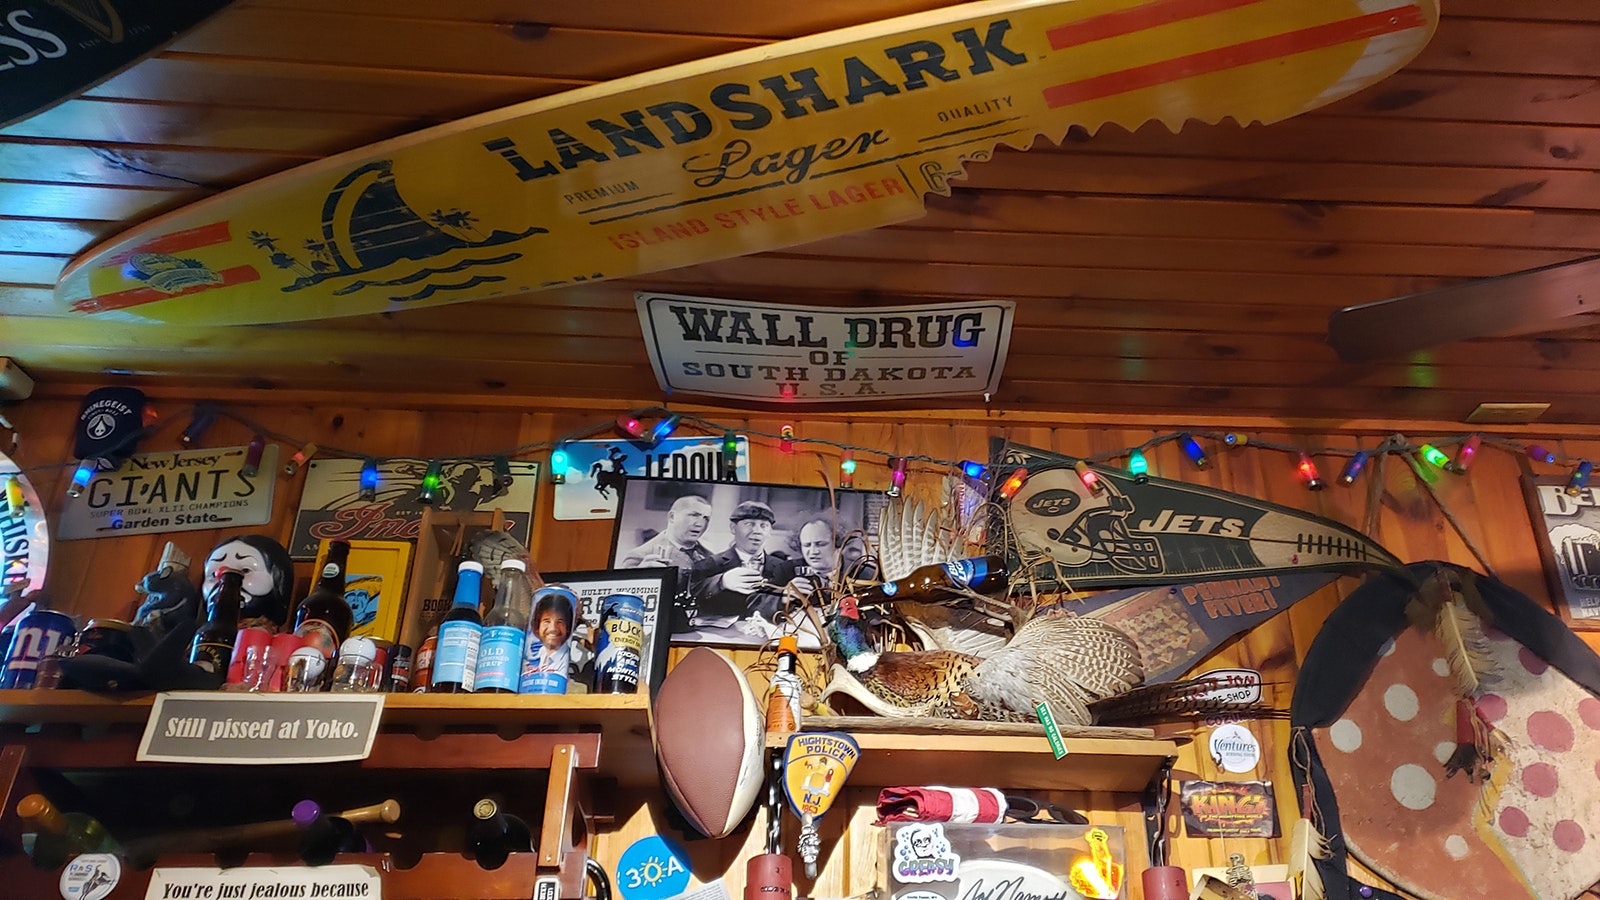 The walls are so full of memorabilia at the Ponderosa Cafe and Bar that the owners are starting to use the ceilings to display new items.